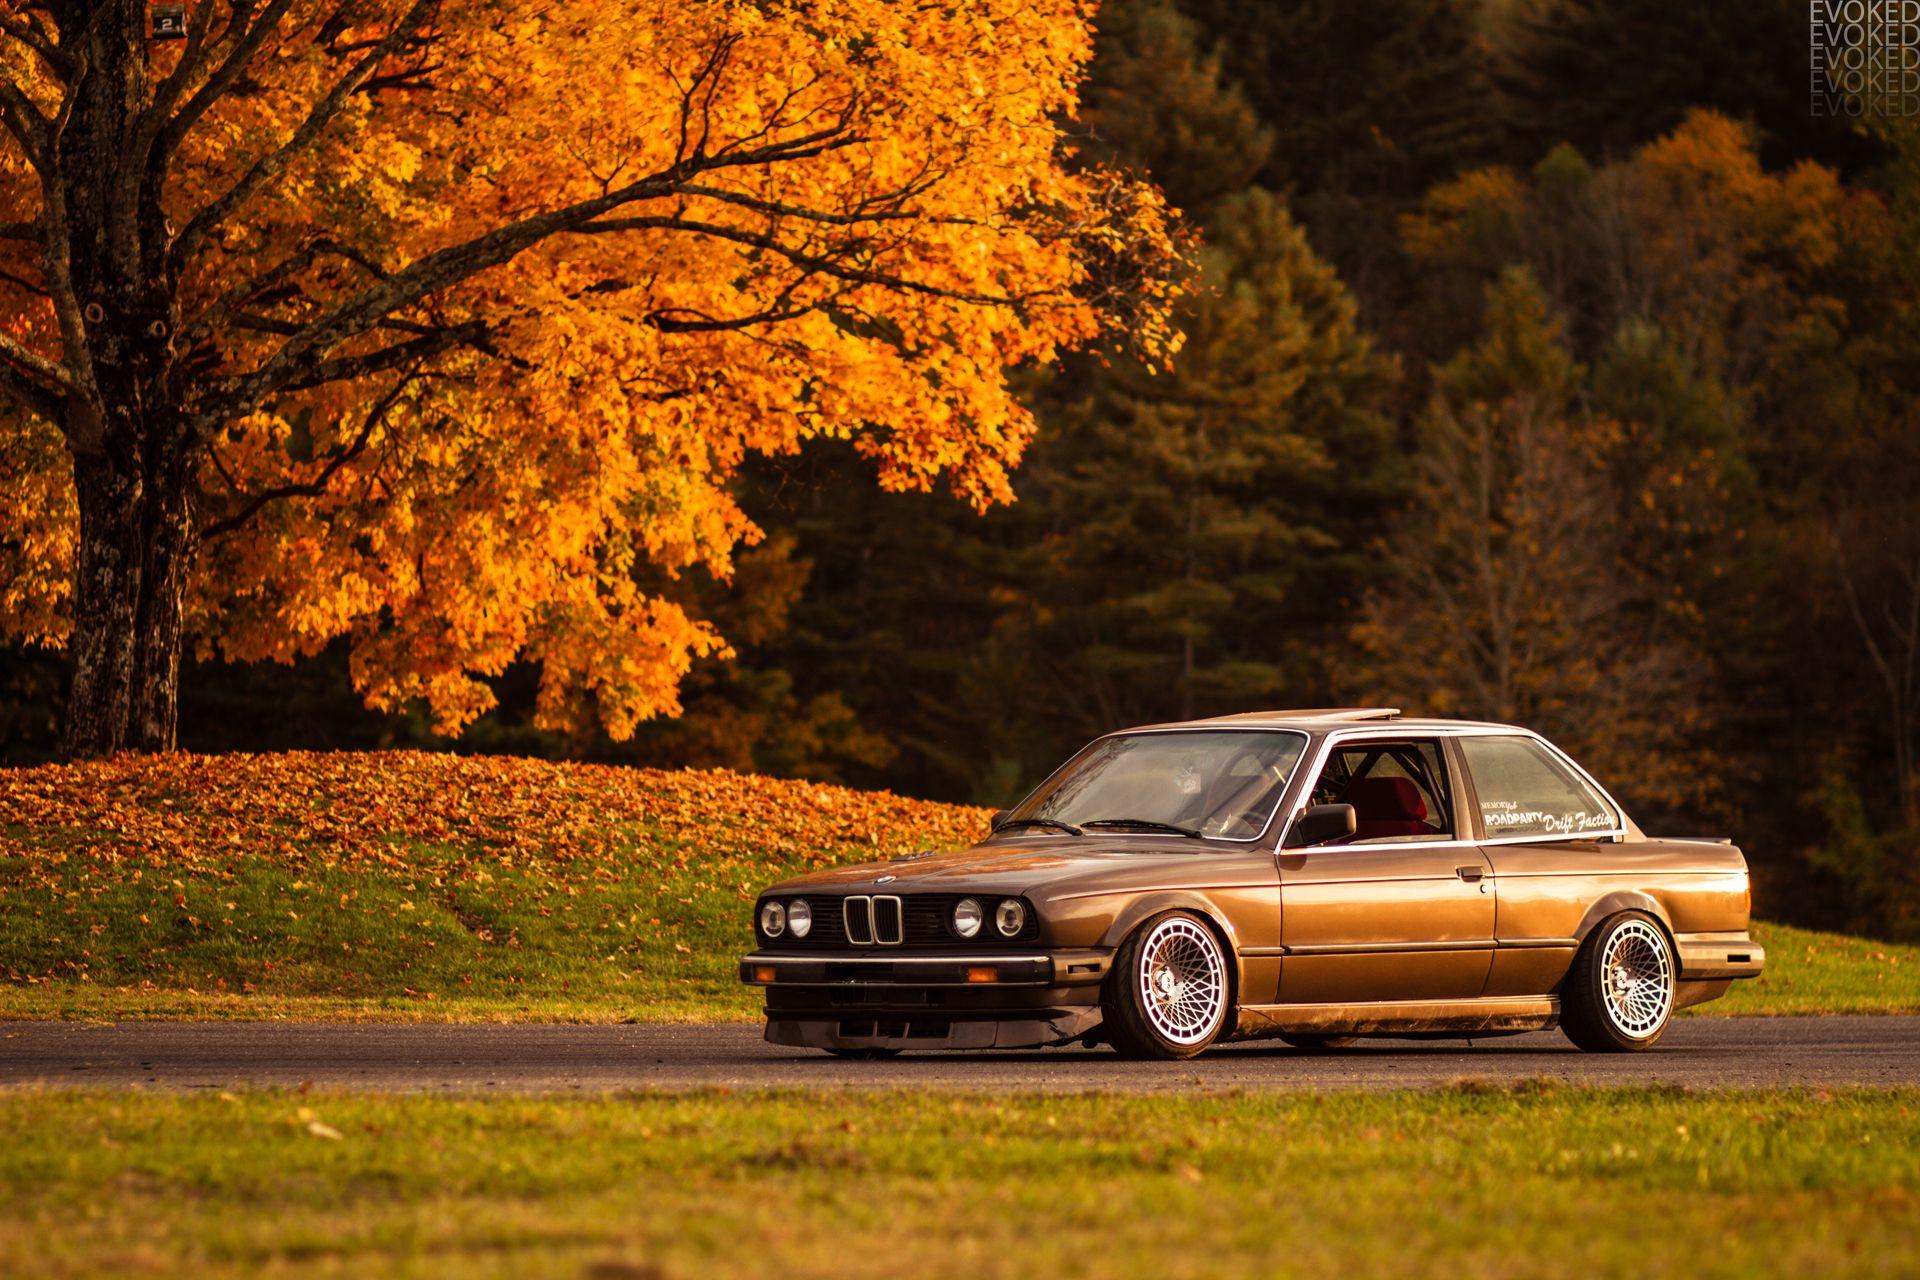 BMW E30 HD Cars 4k Wallpapers Images Backgrounds Photos and Pictures